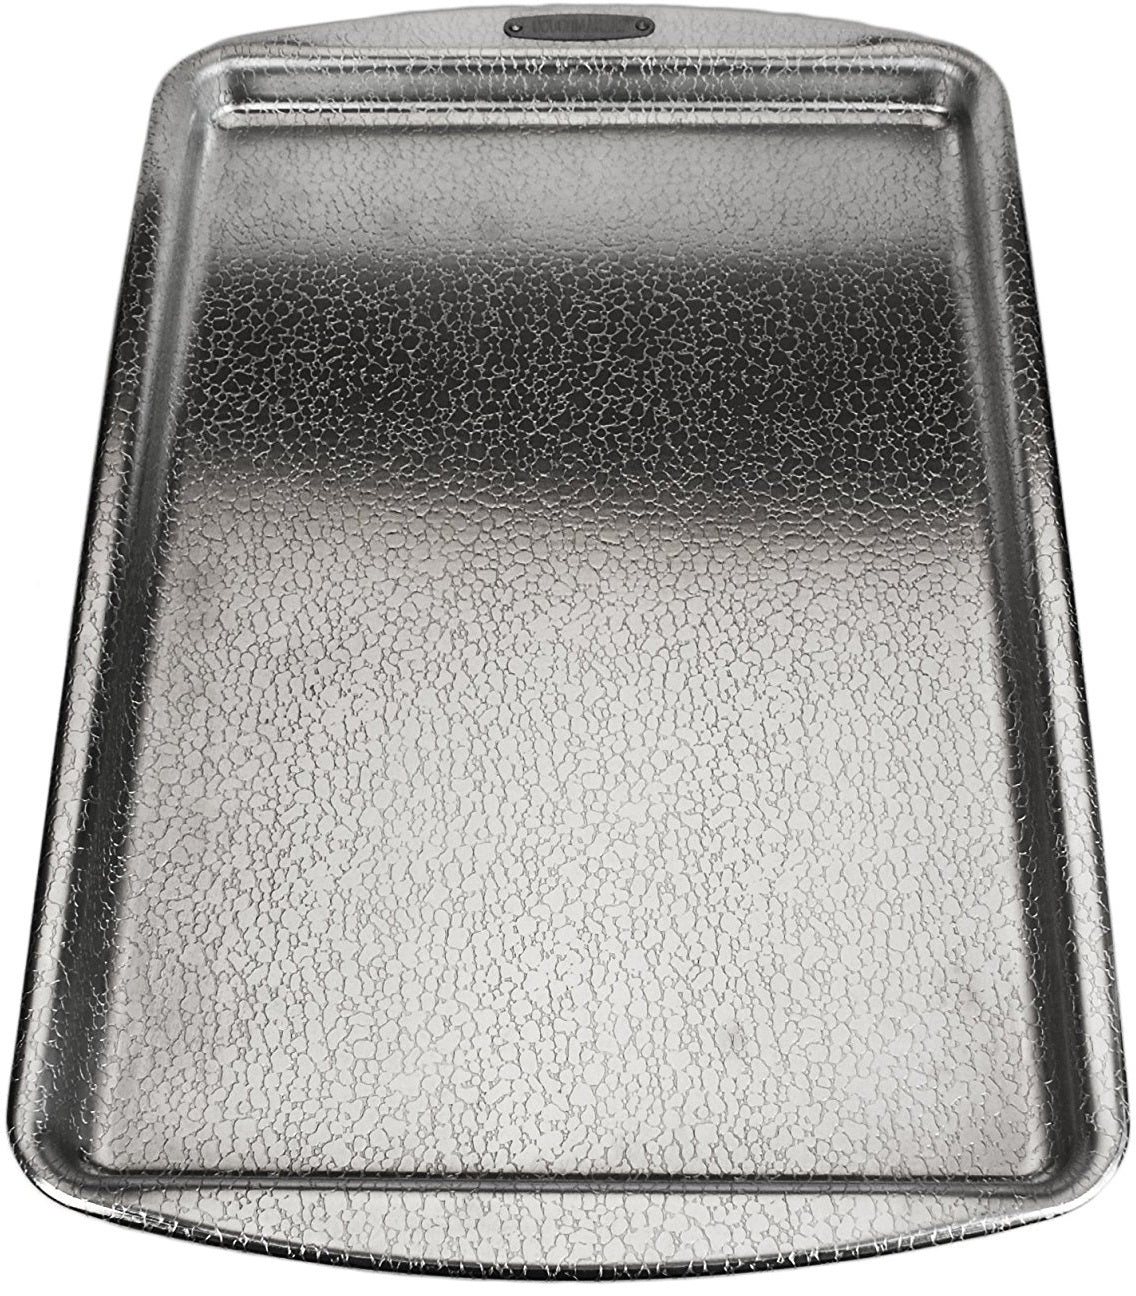 Doughmakers 103114 Jelly Roll Pan, 10" x 15"